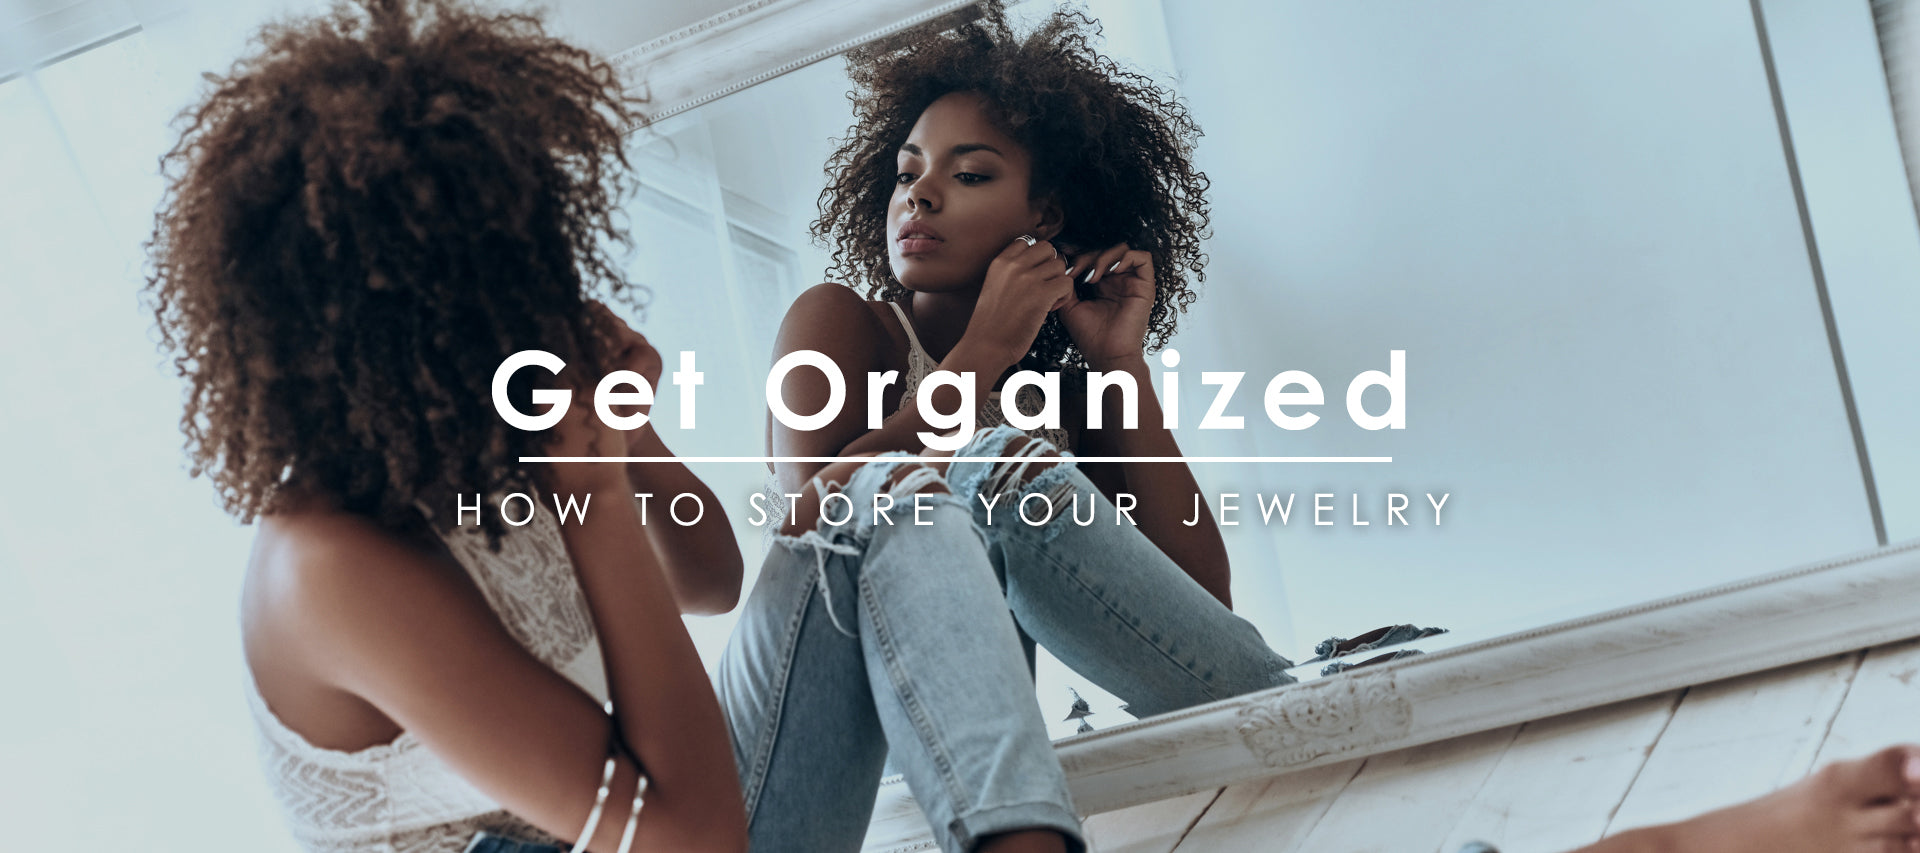 How to Store Jewelry